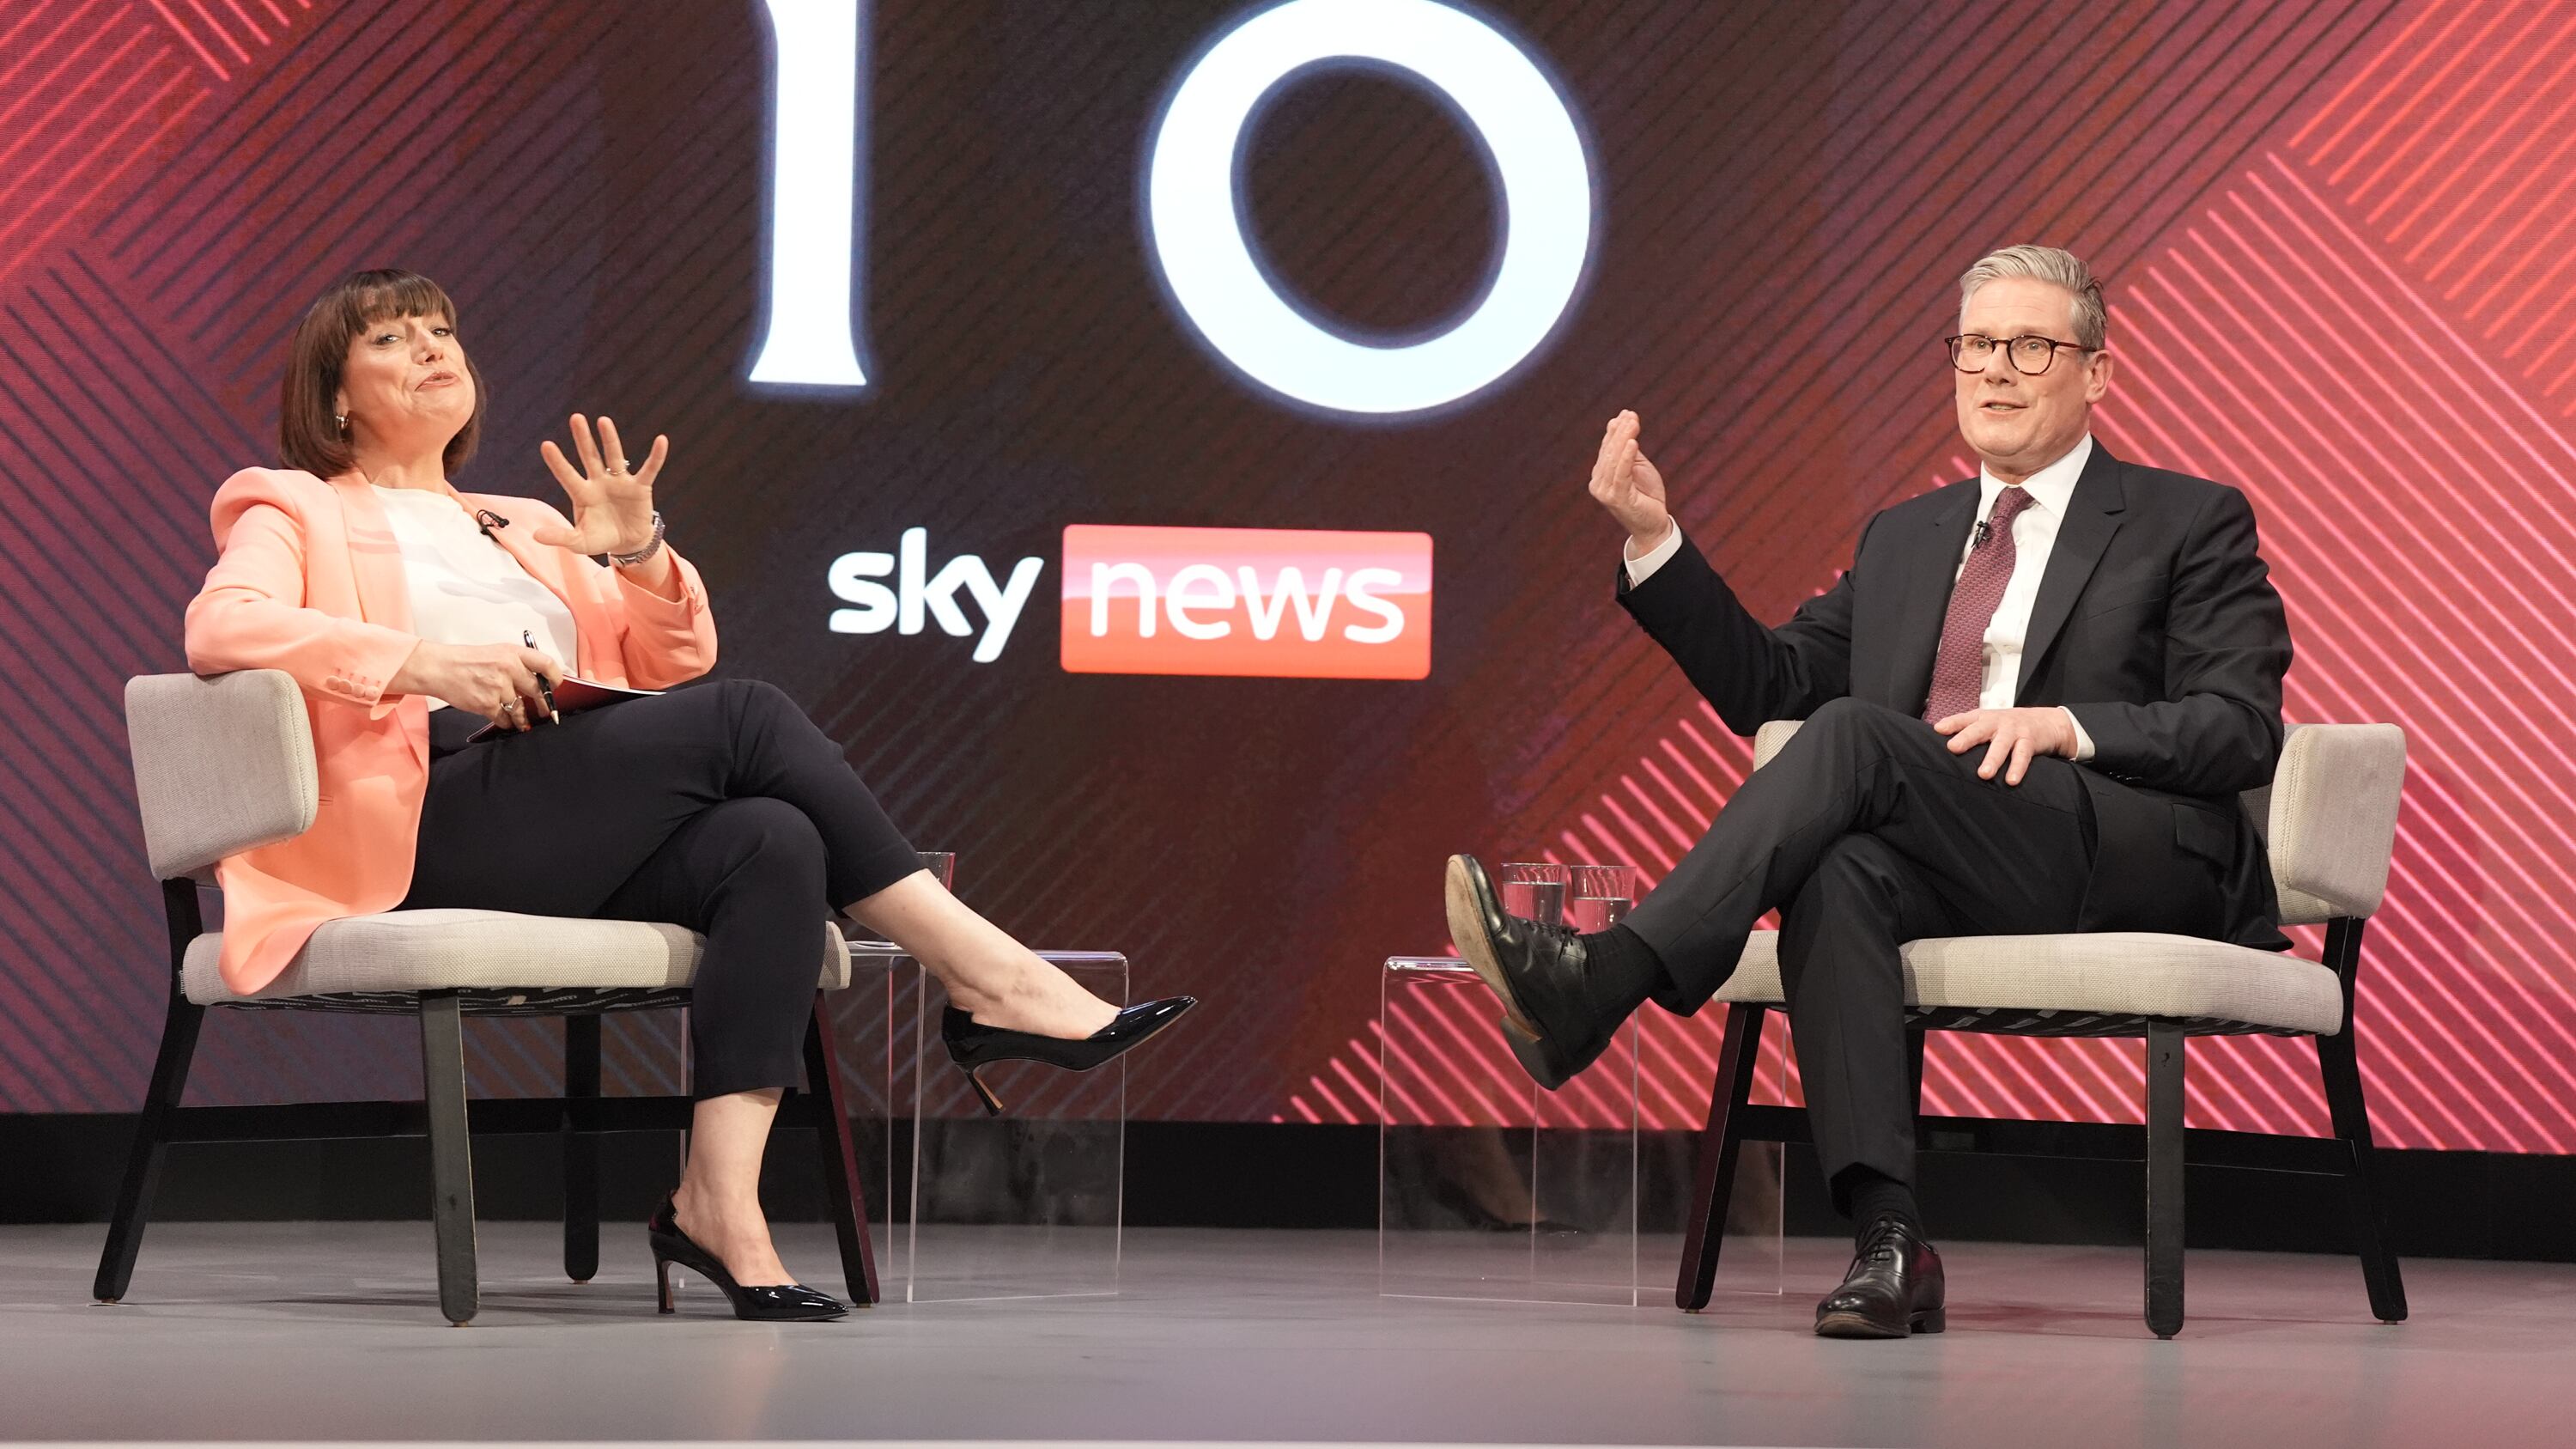 Labour Party leader Sir Keir Starmer, during a Sky News election event with Sky’s political editor Beth Rigby, in Grimsby